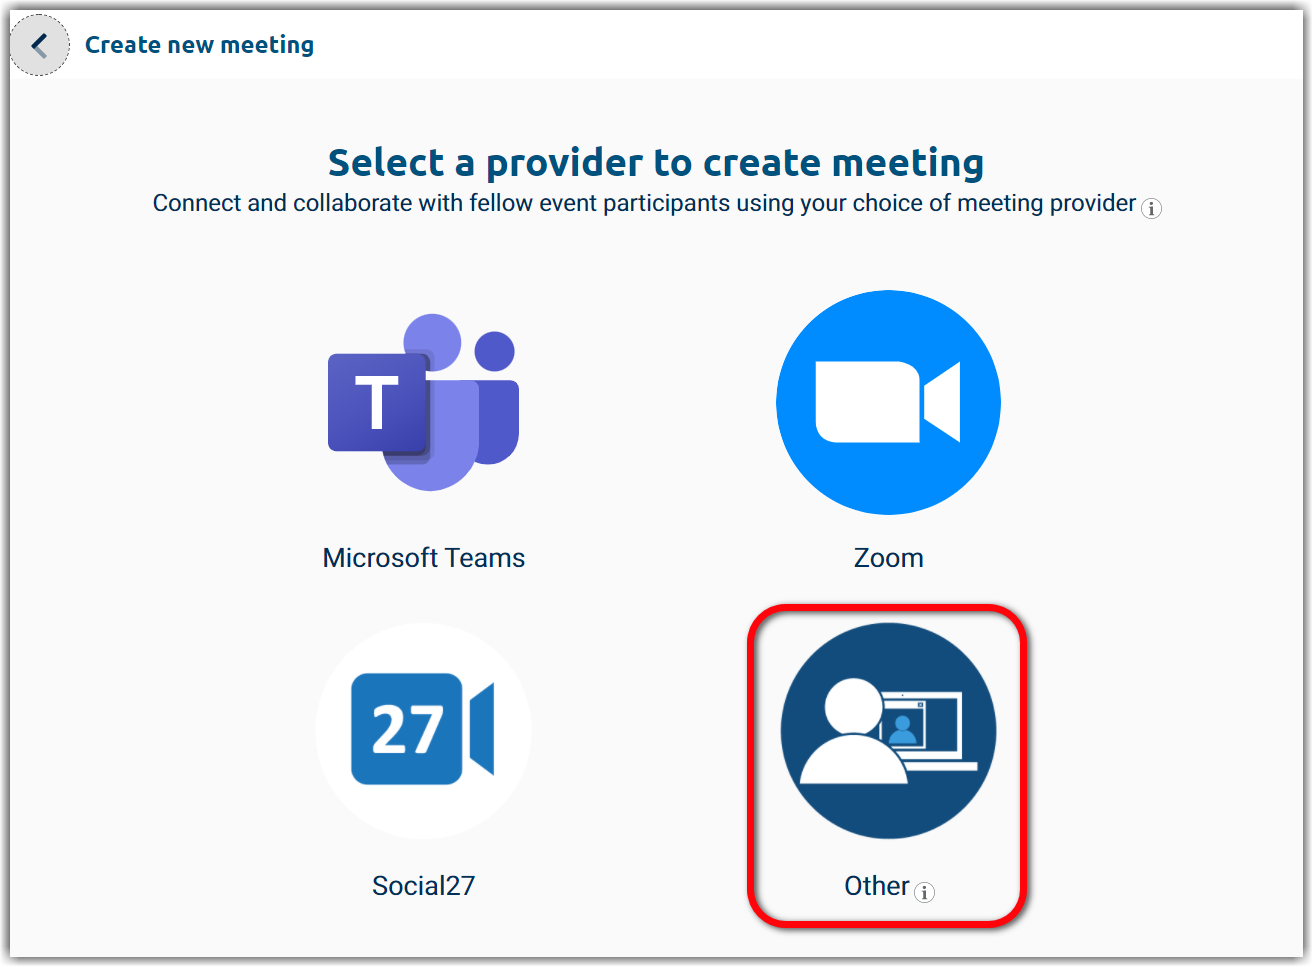 meeting-provider-other.png